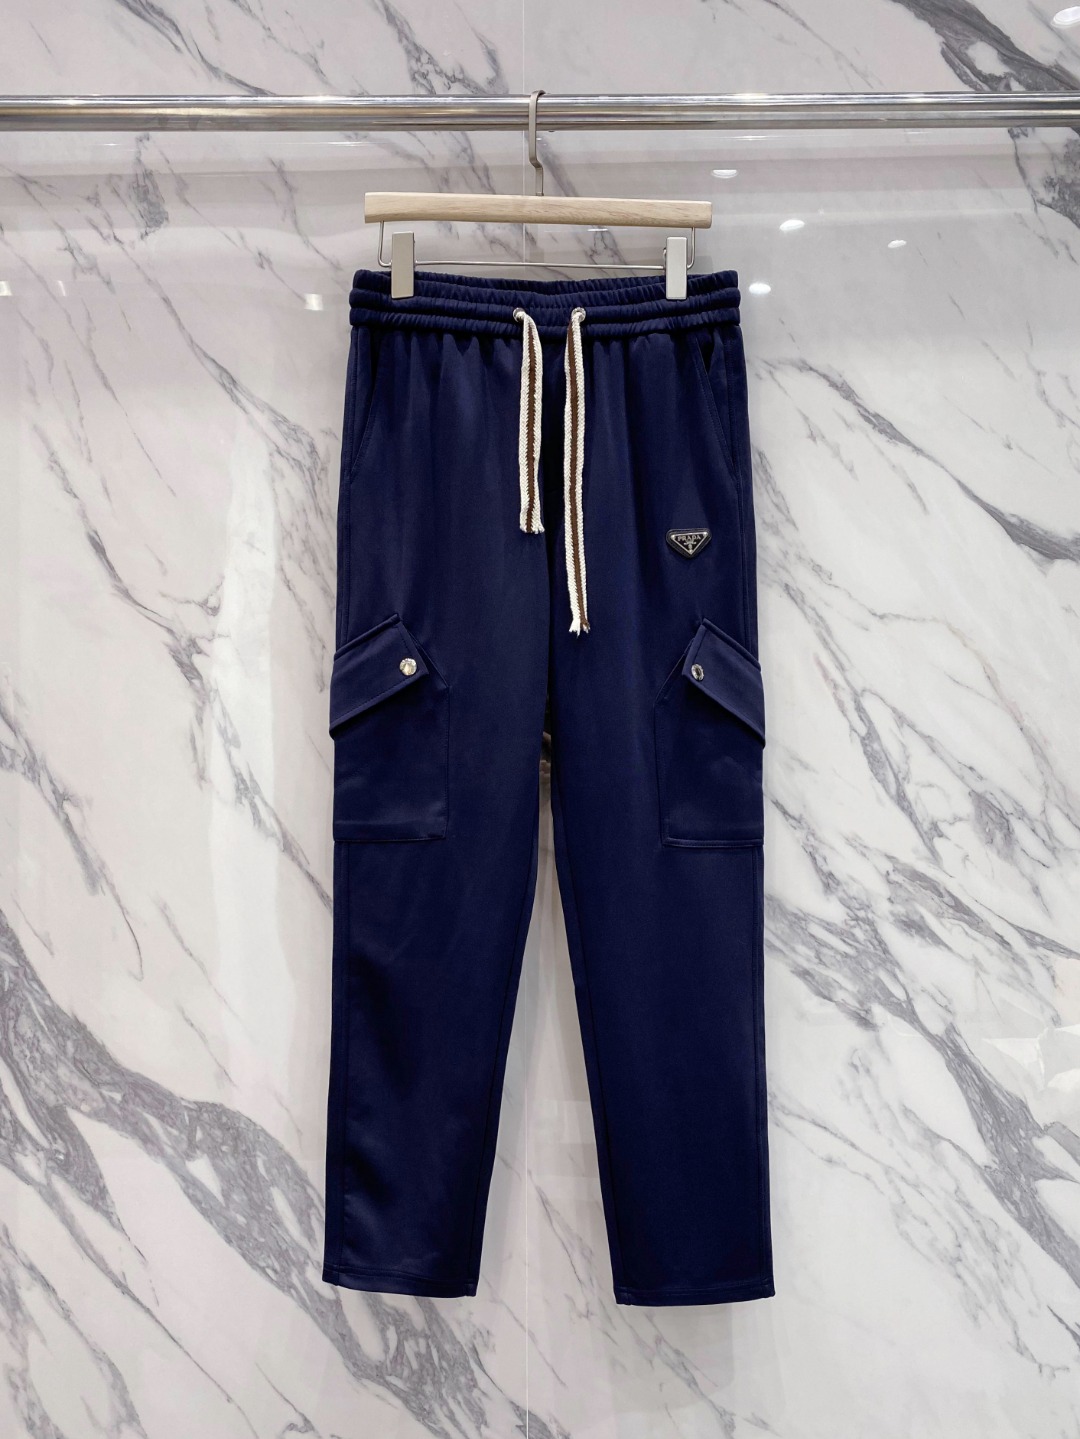 Prada Clothing Pants & Trousers Fall/Winter Collection Casual